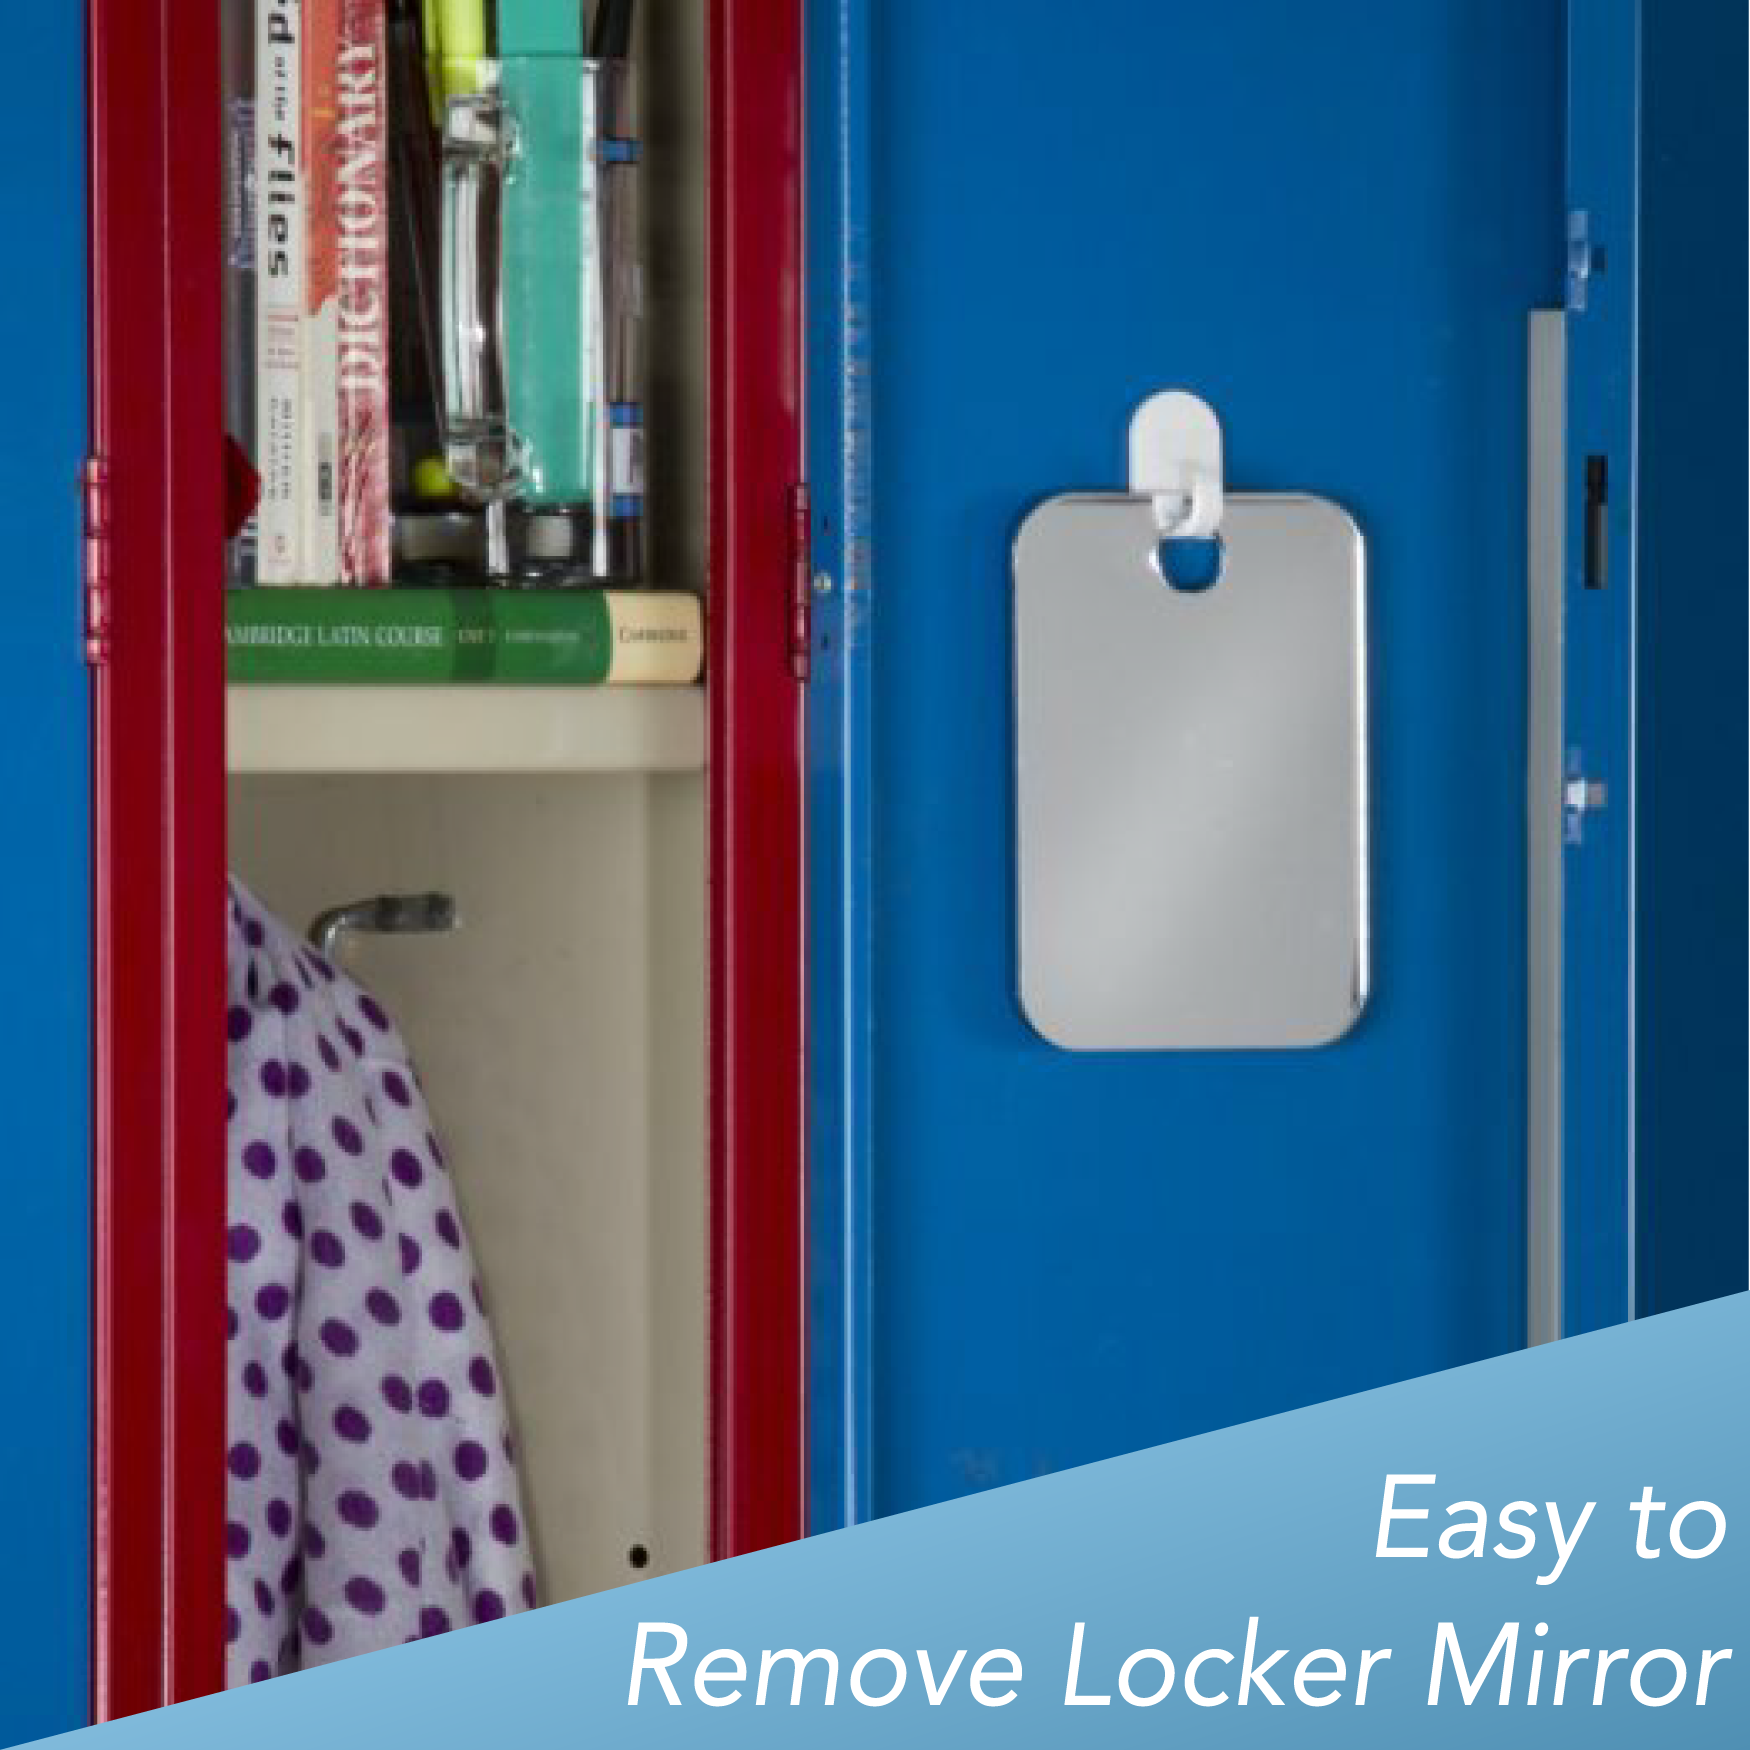 Unbreakable Locker Mirror - The Shave Well Company, White